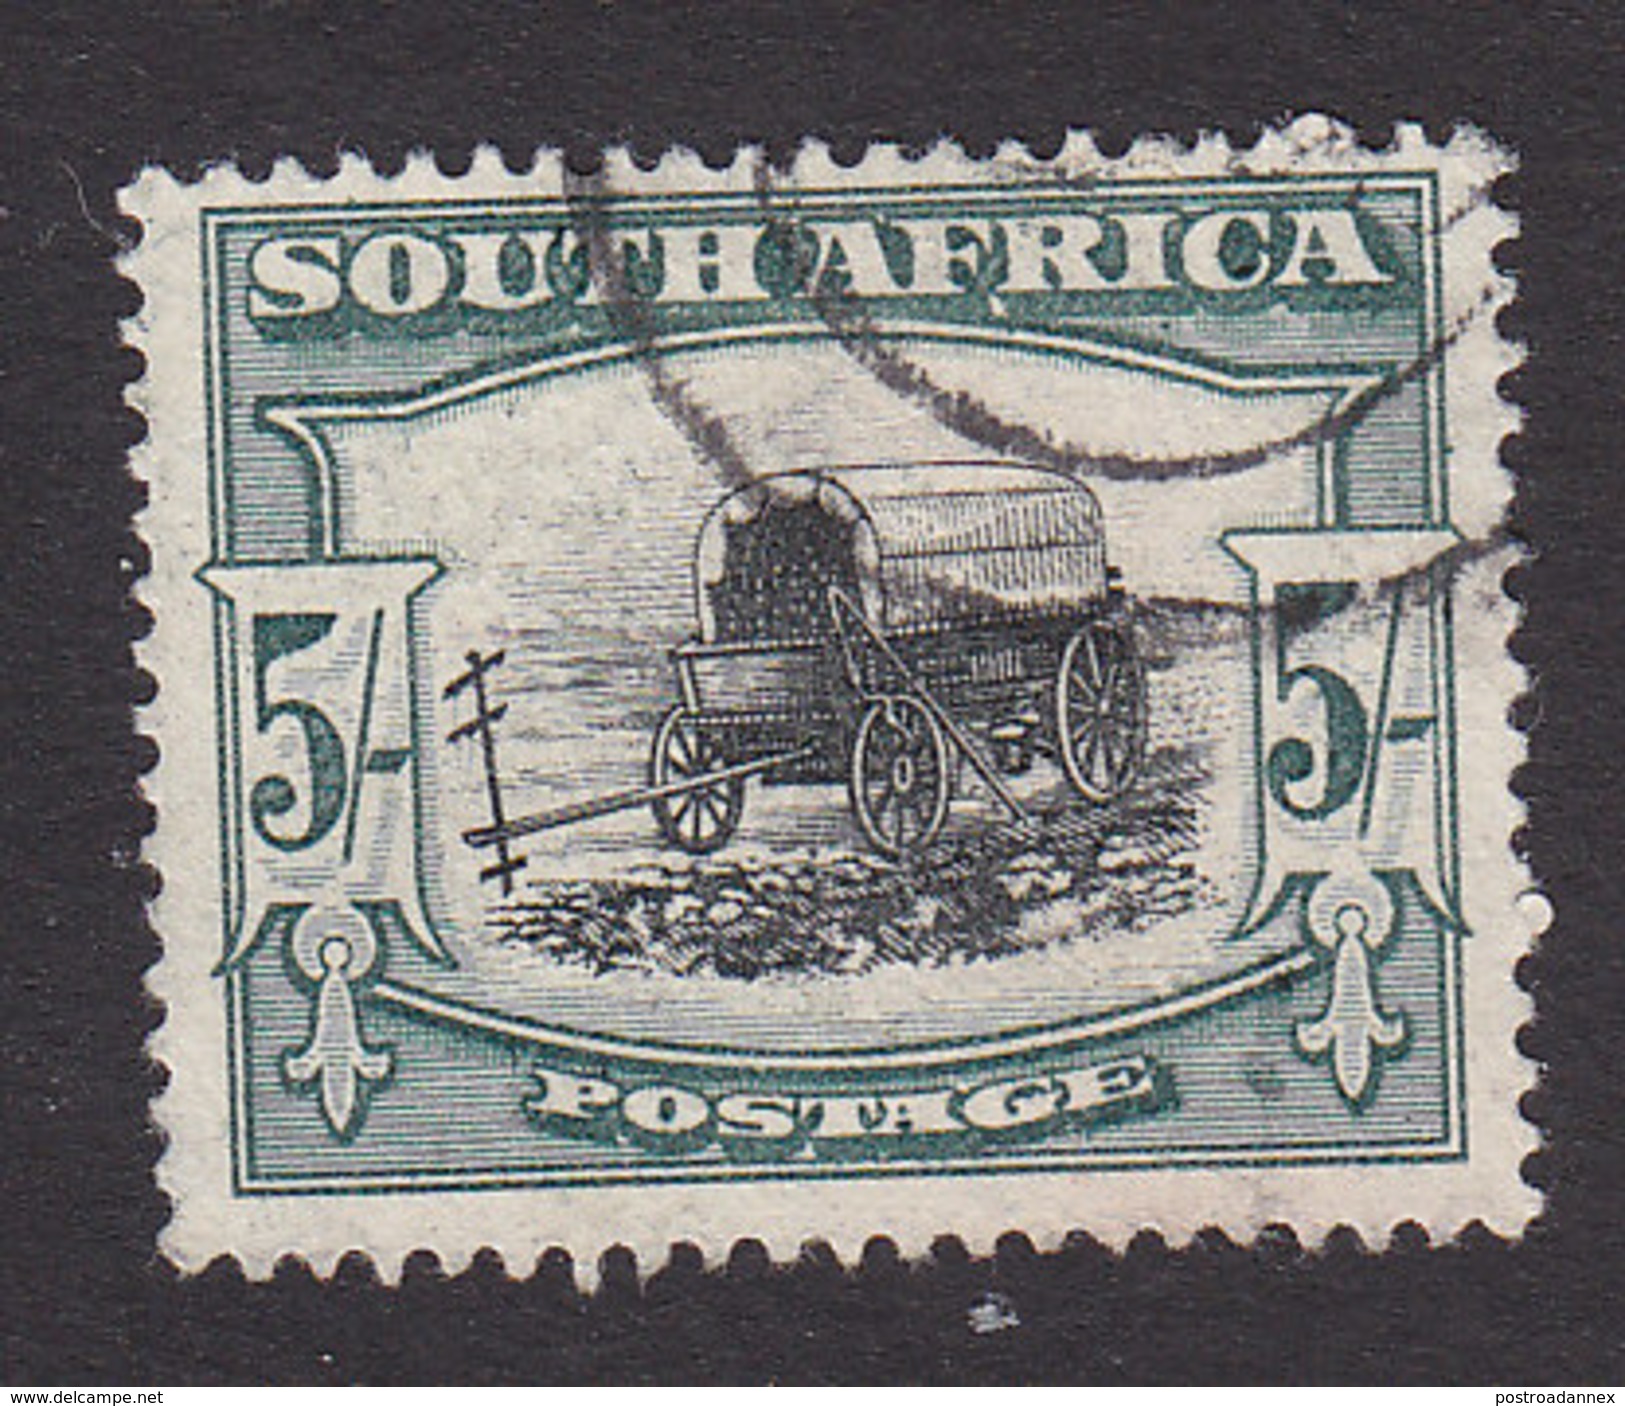 South Africa, Scott #64a, Used, Ox Wagon, Issued 1933 - Oblitérés